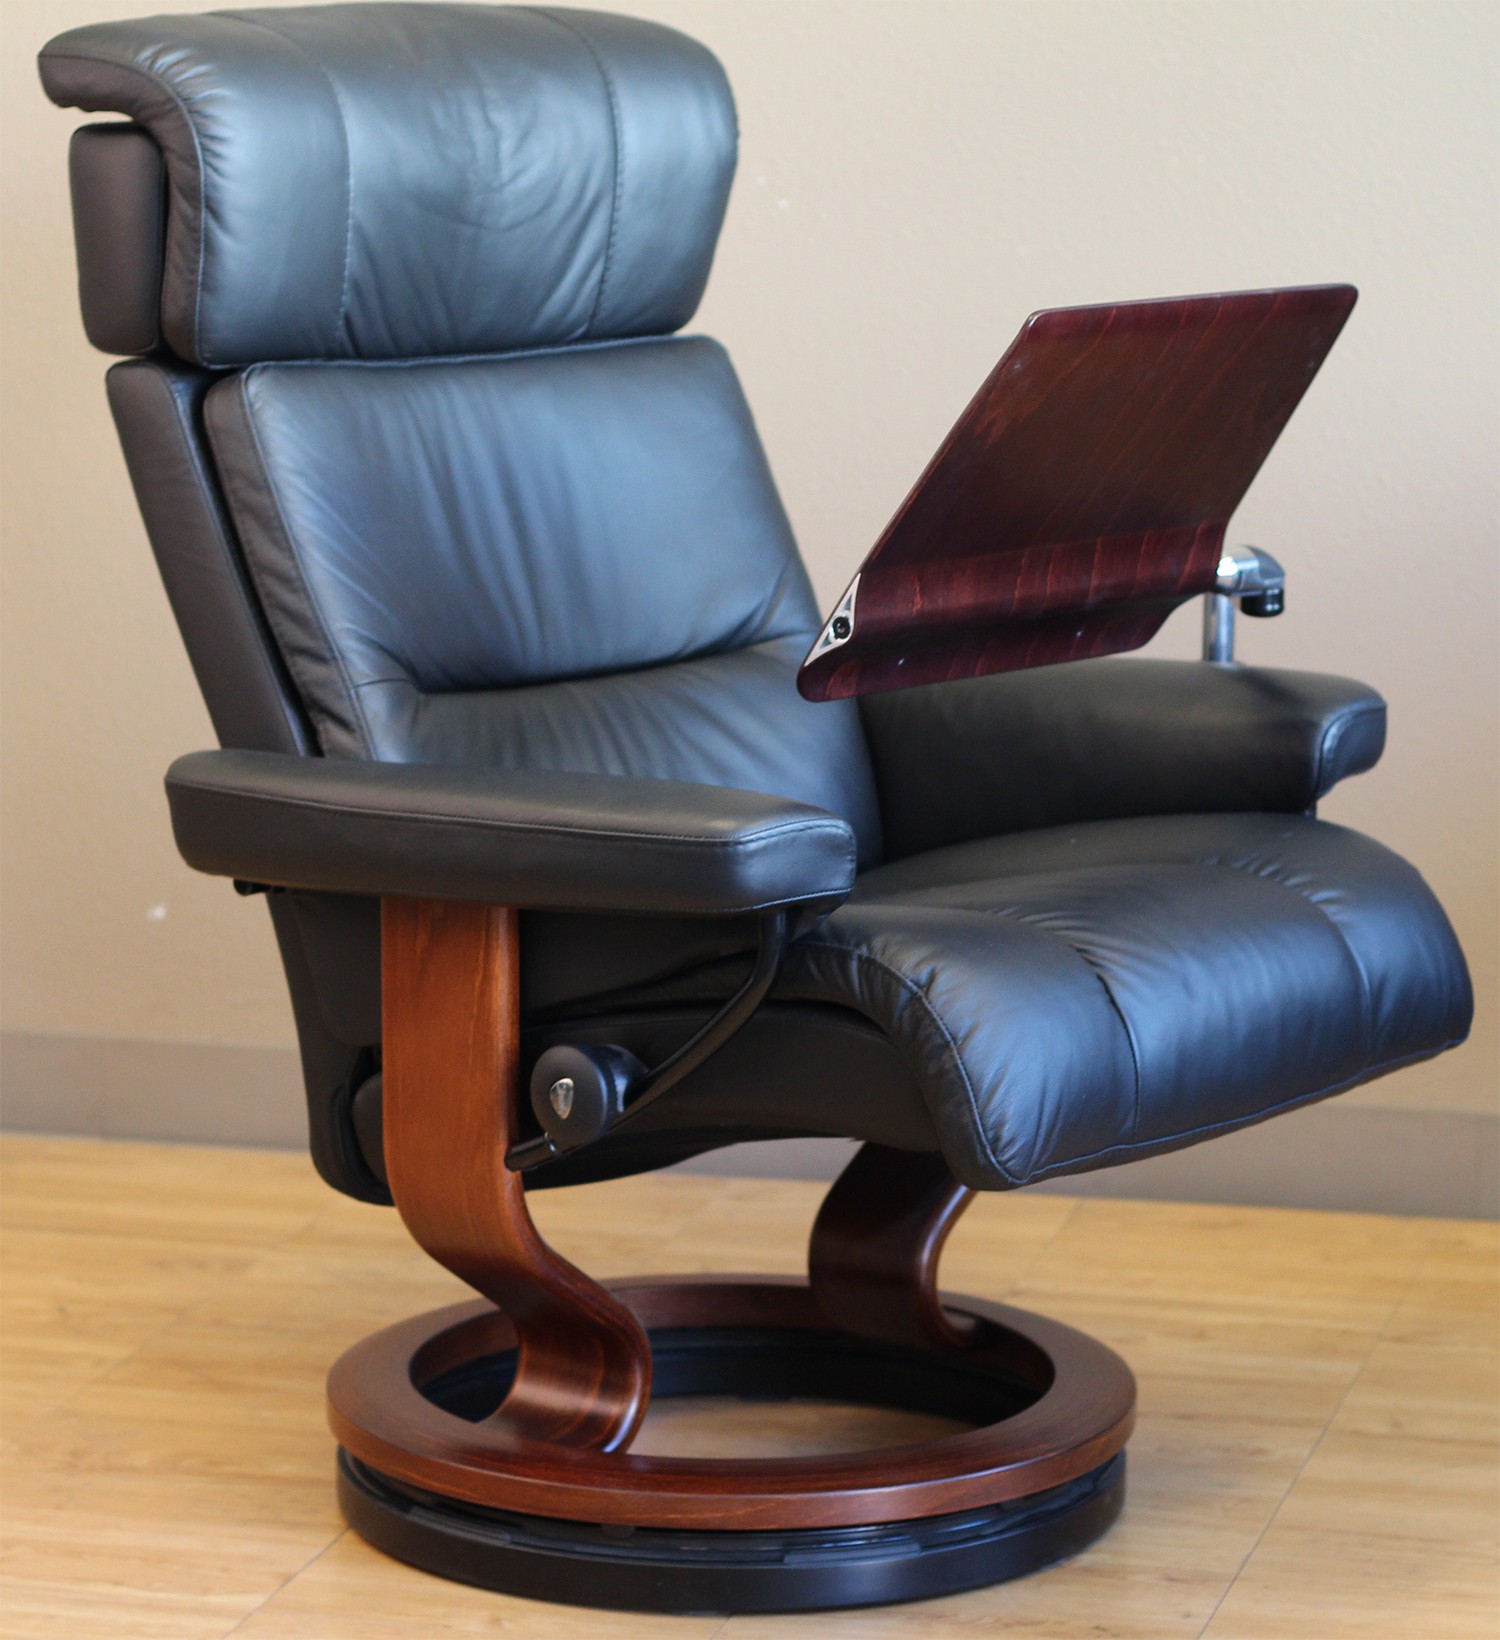 Stressless recliner personal computer laptop table for